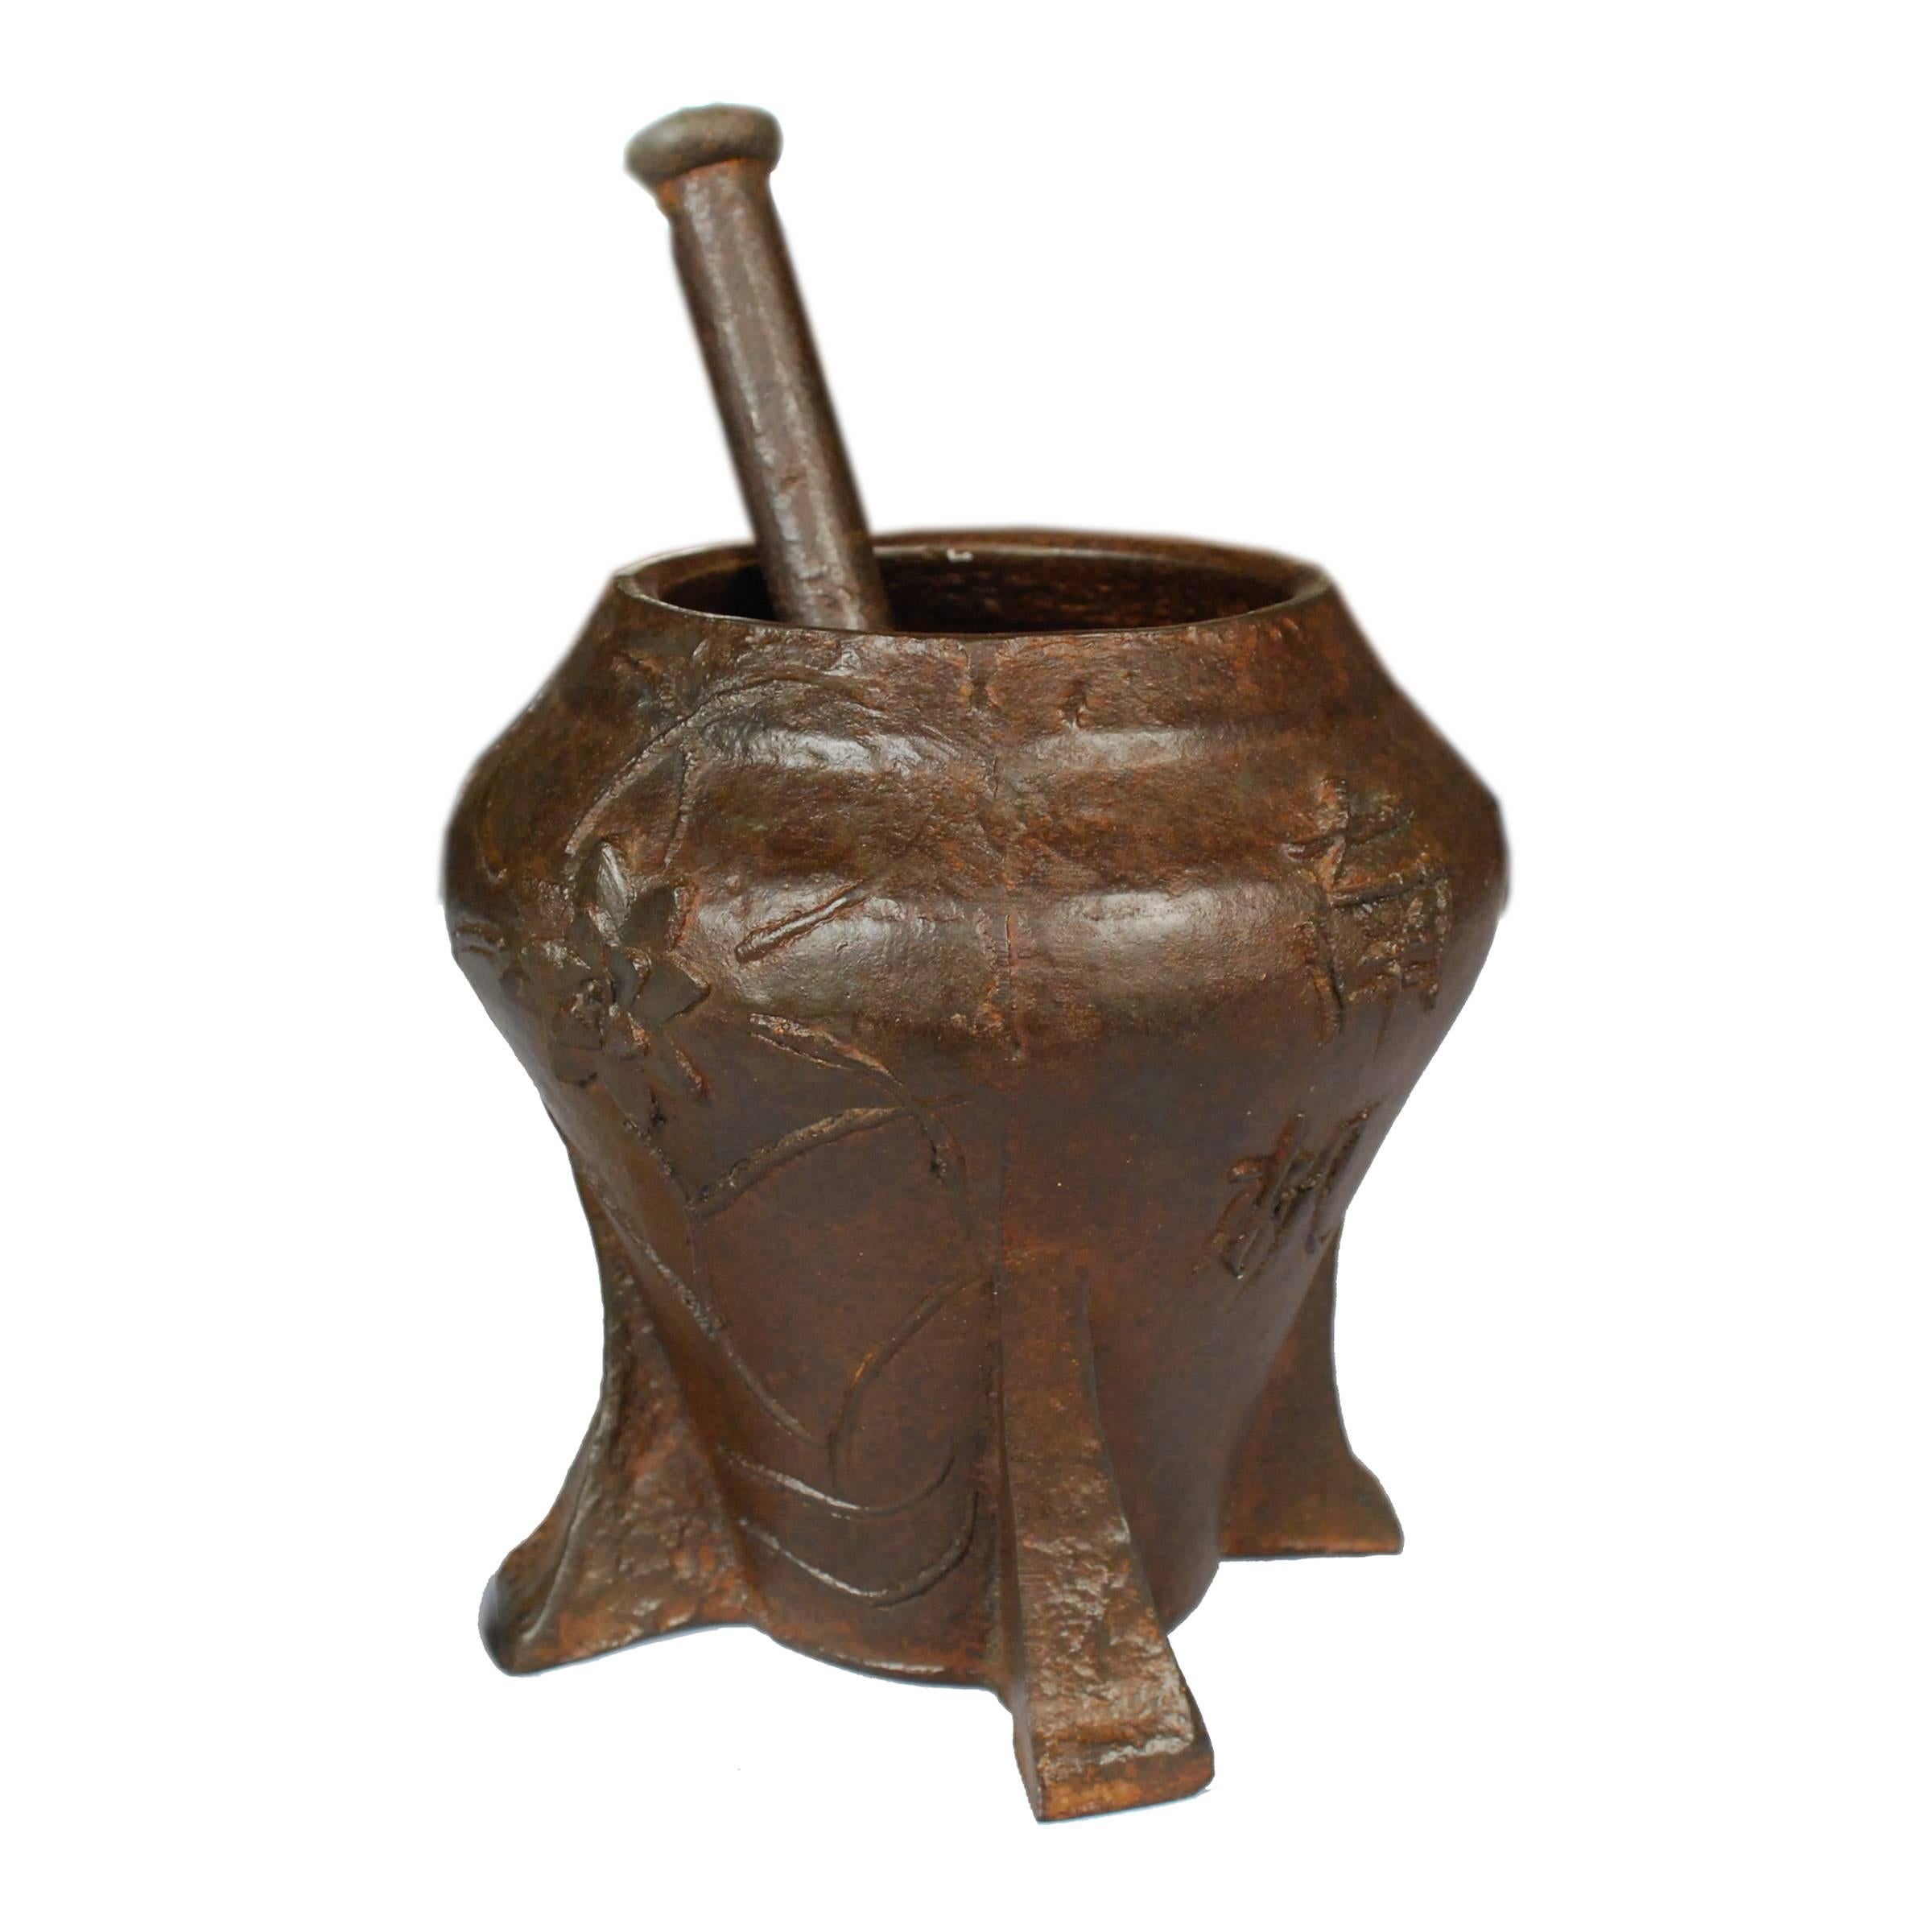 This vintage mortar and pestle from Shanxi, China was cast in iron with a floral relief. It was originally used in a traditional apothecary to create herbal medicine. The container happens to be just the right size to beautifully accommodate a